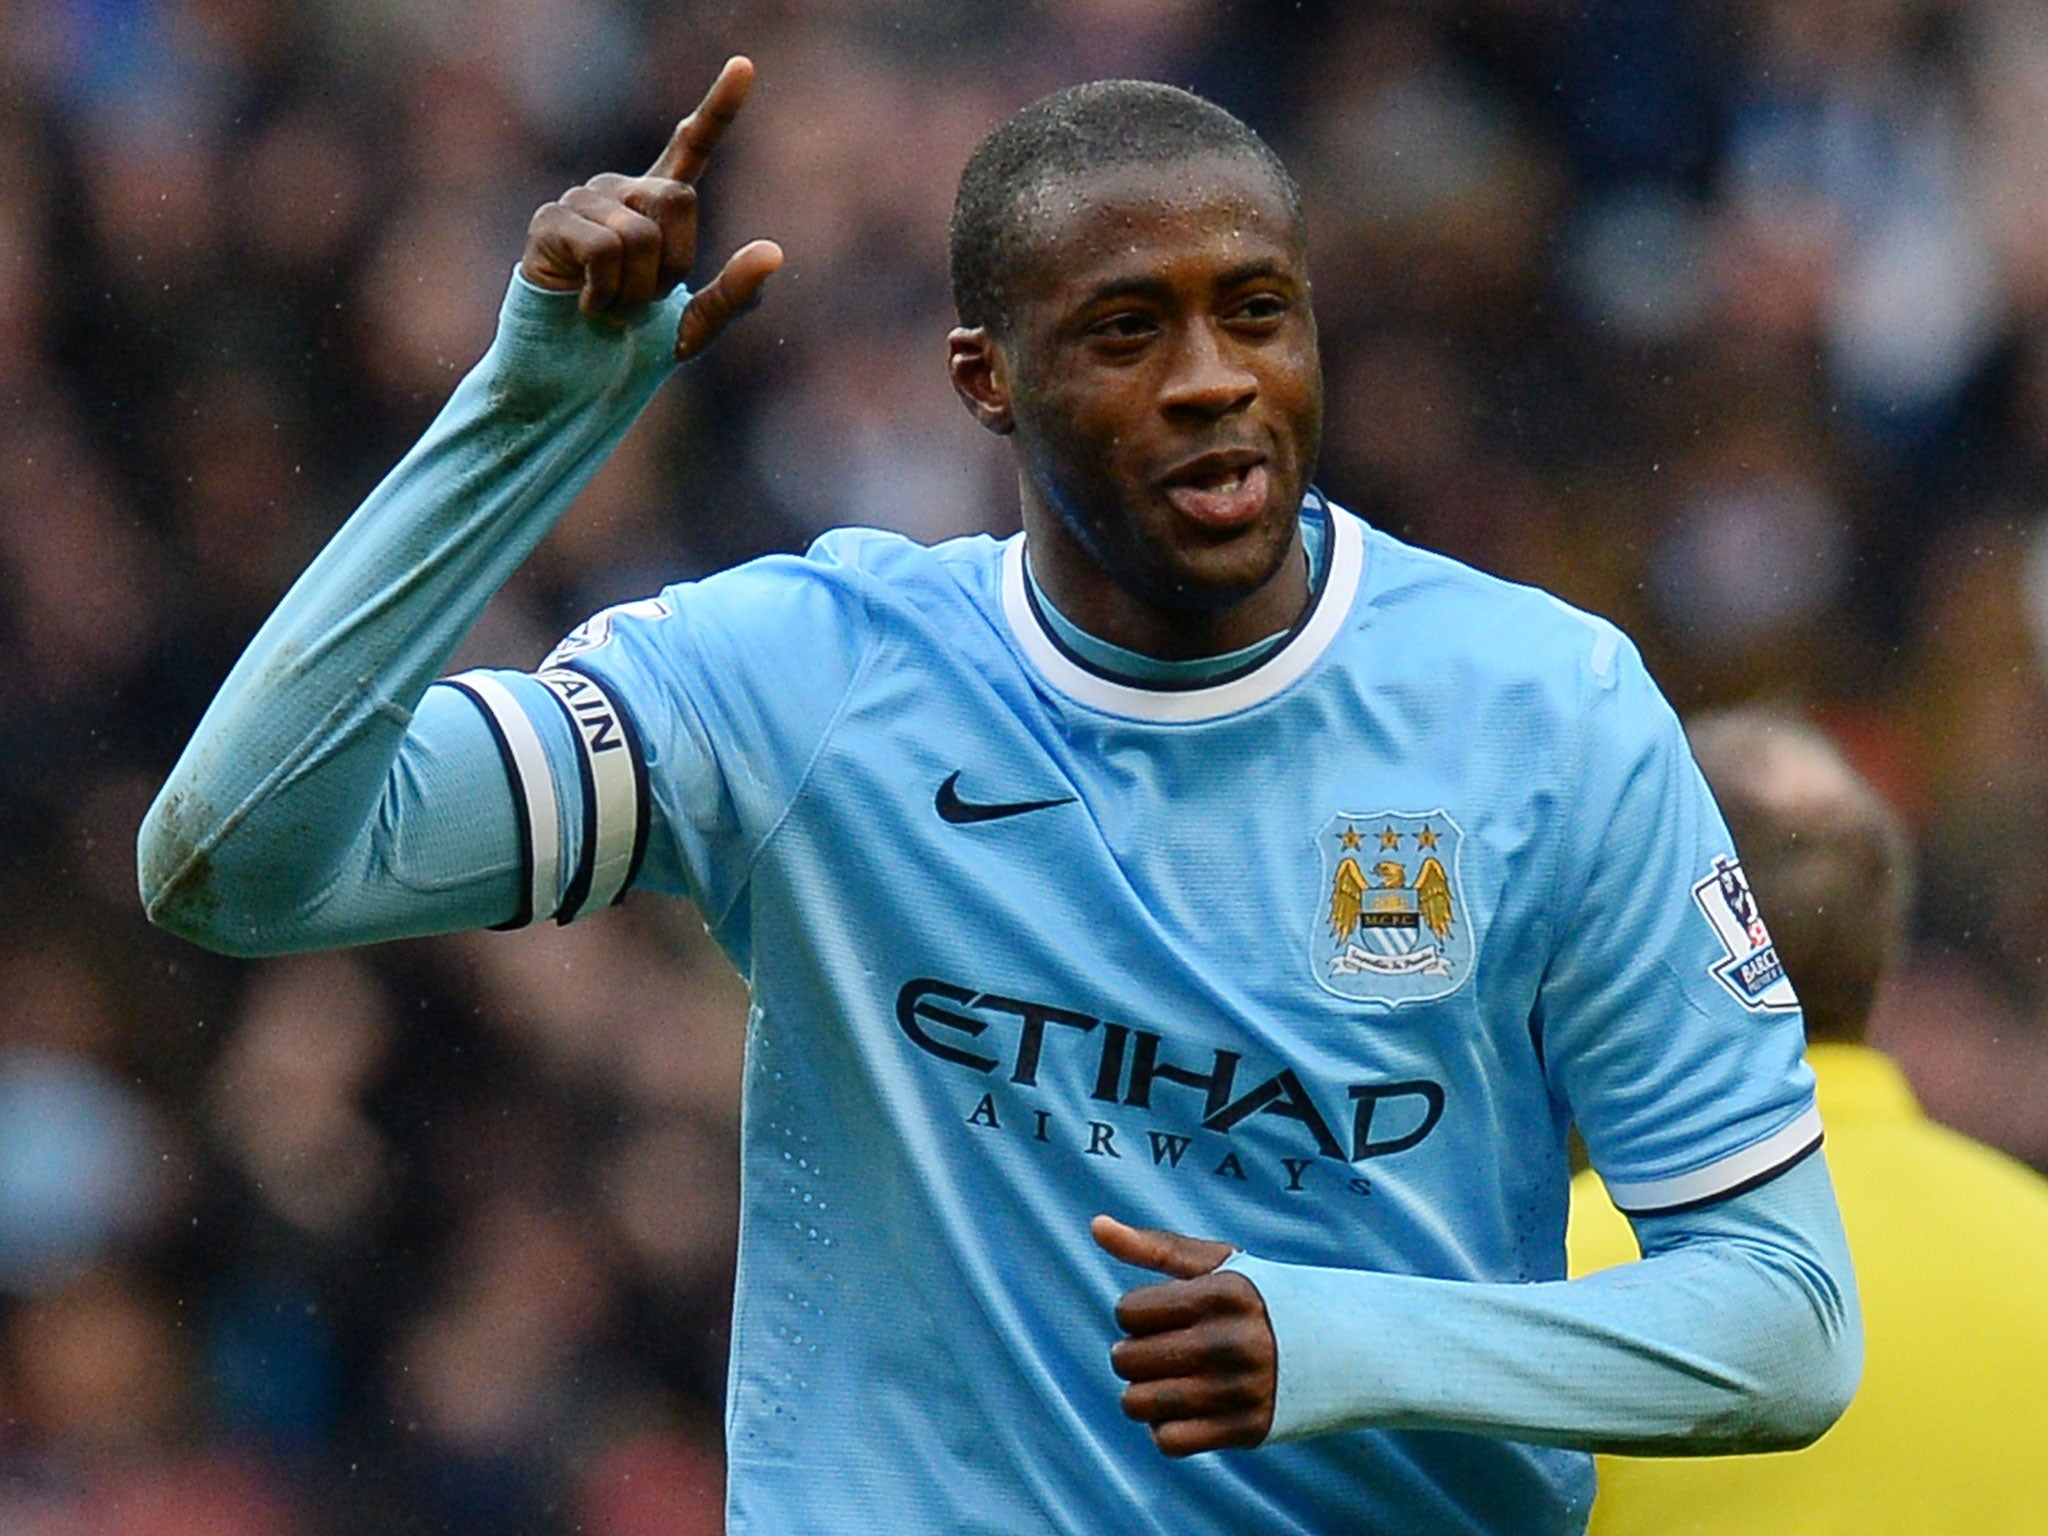 Yaya Toure has been exceptional of late